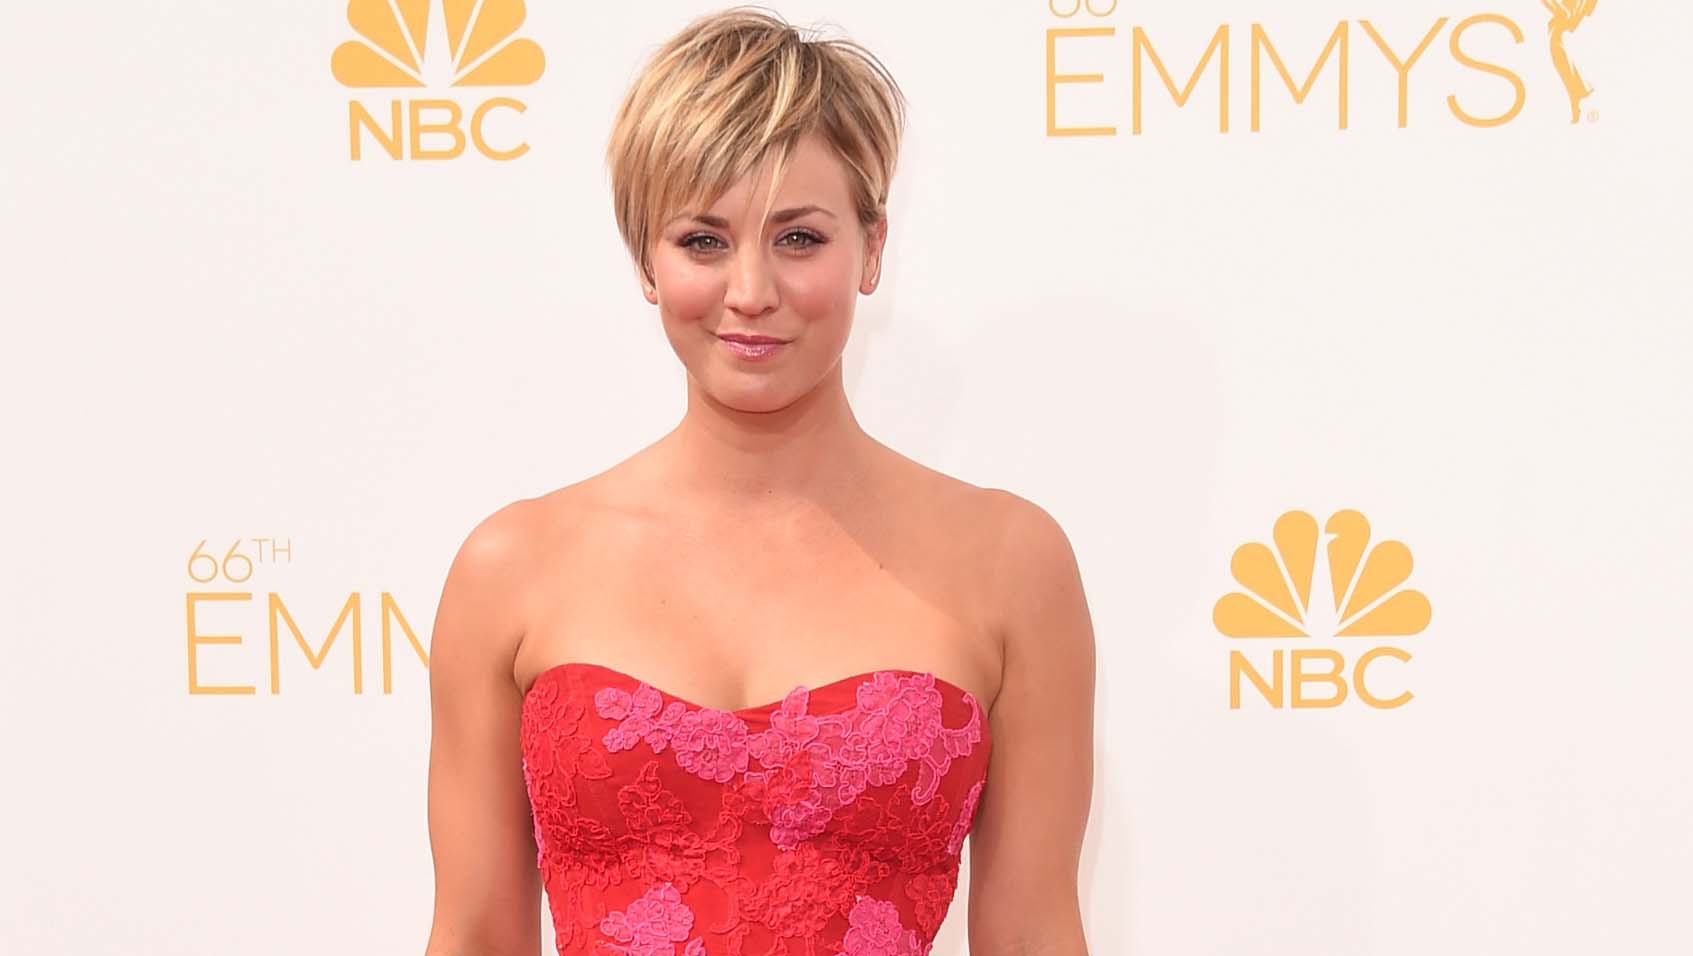 dianne workman recommends kaley cuoco does porn pic